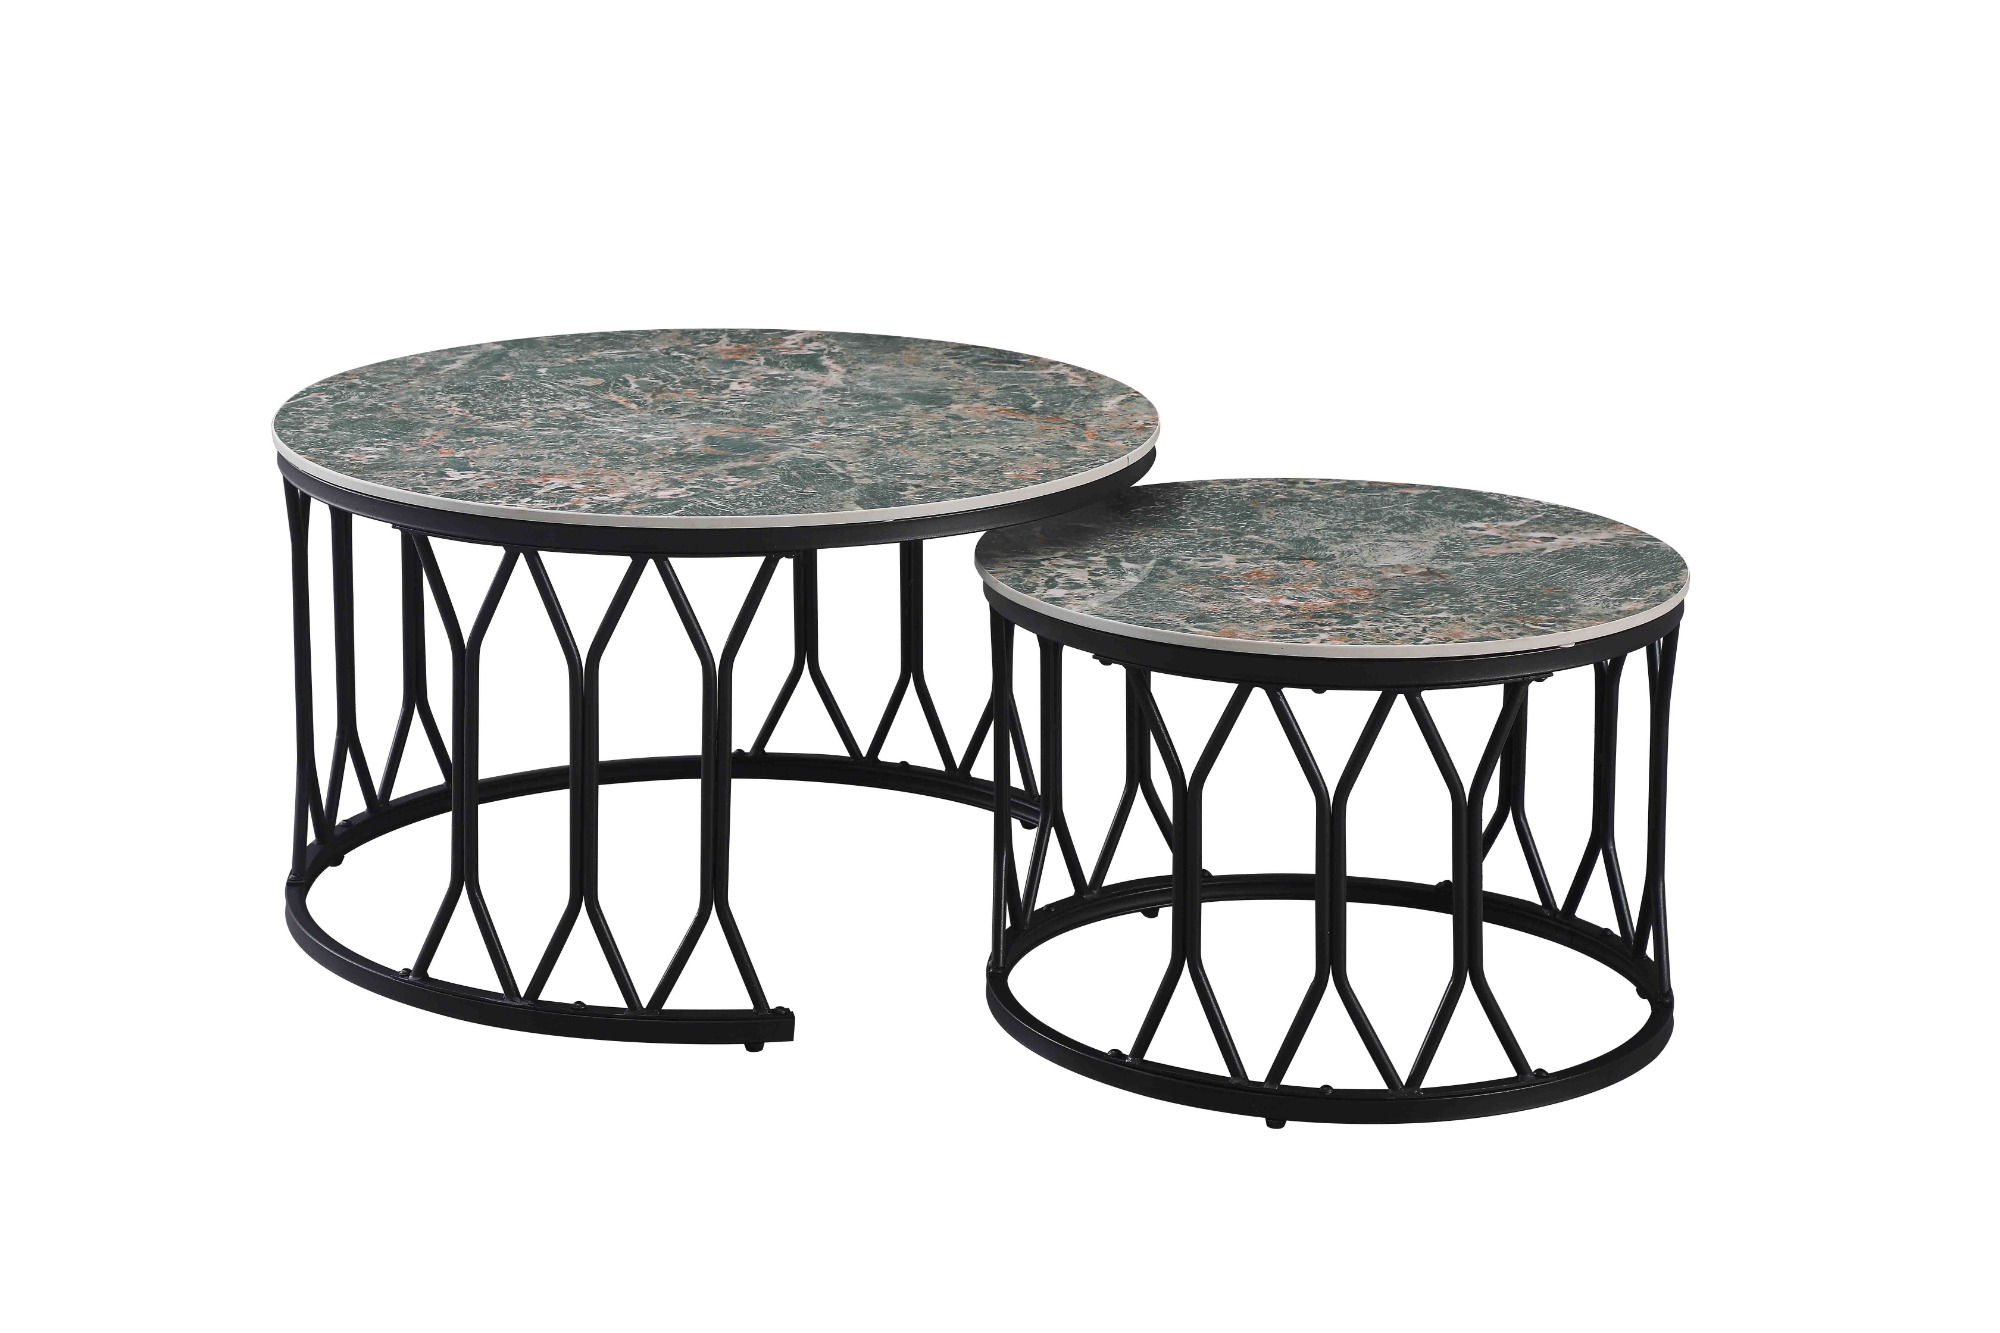 A Coffee Table Set with Amazon Style